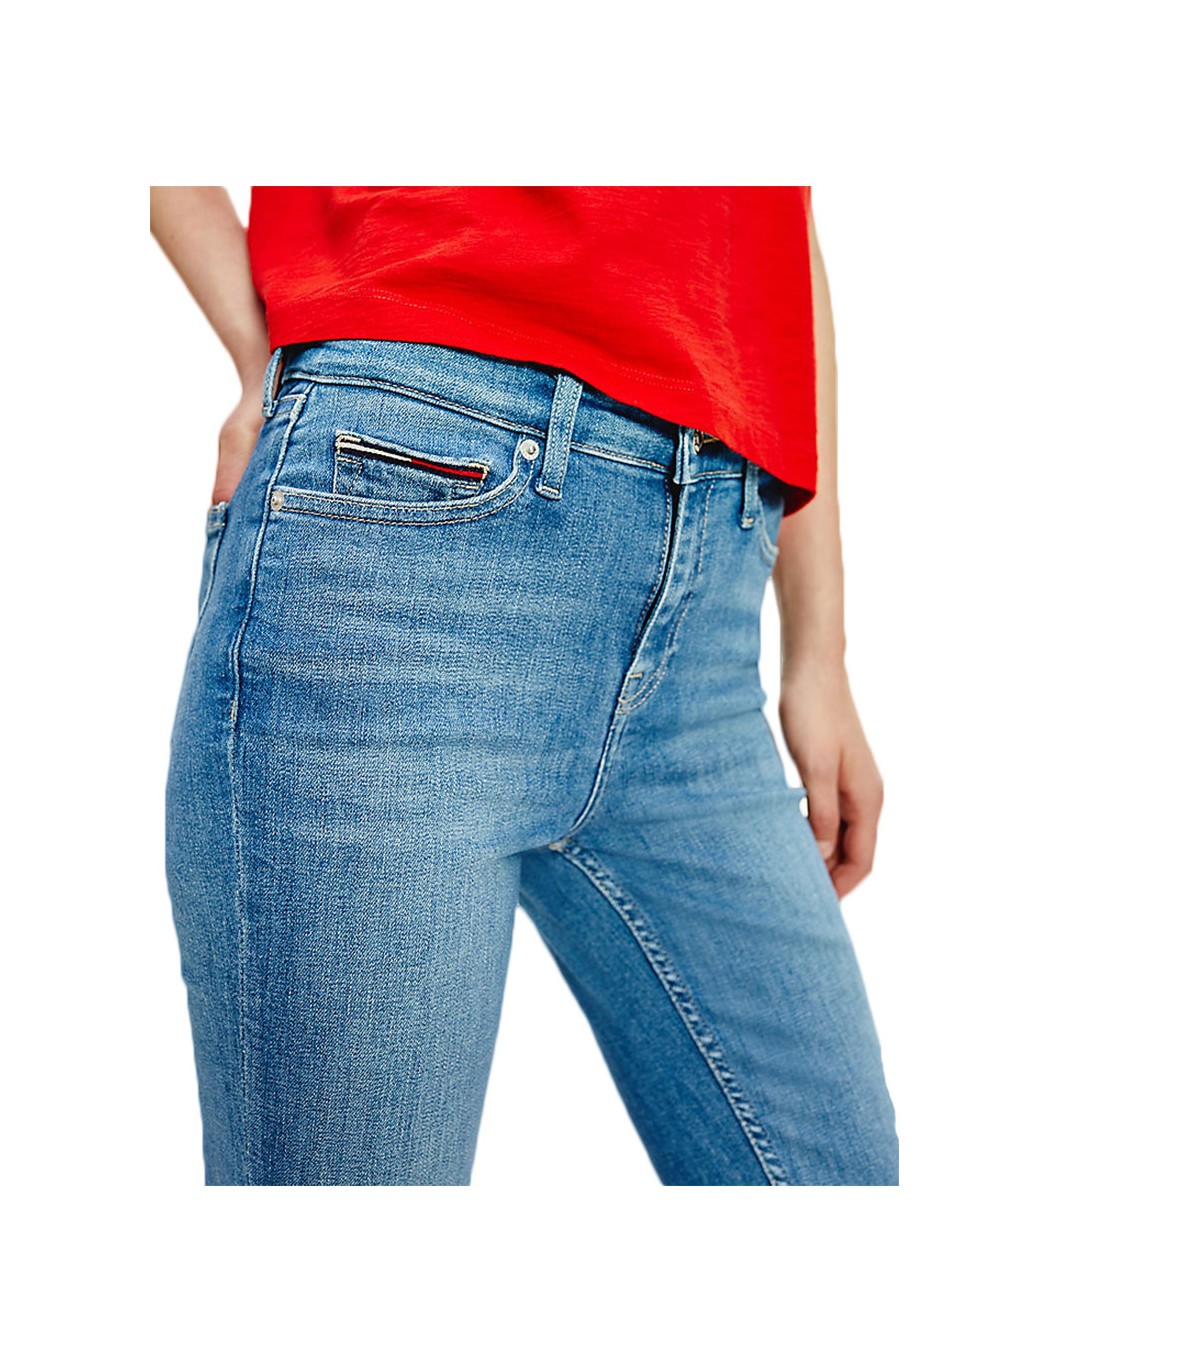 Nora skinny mid rise jeans